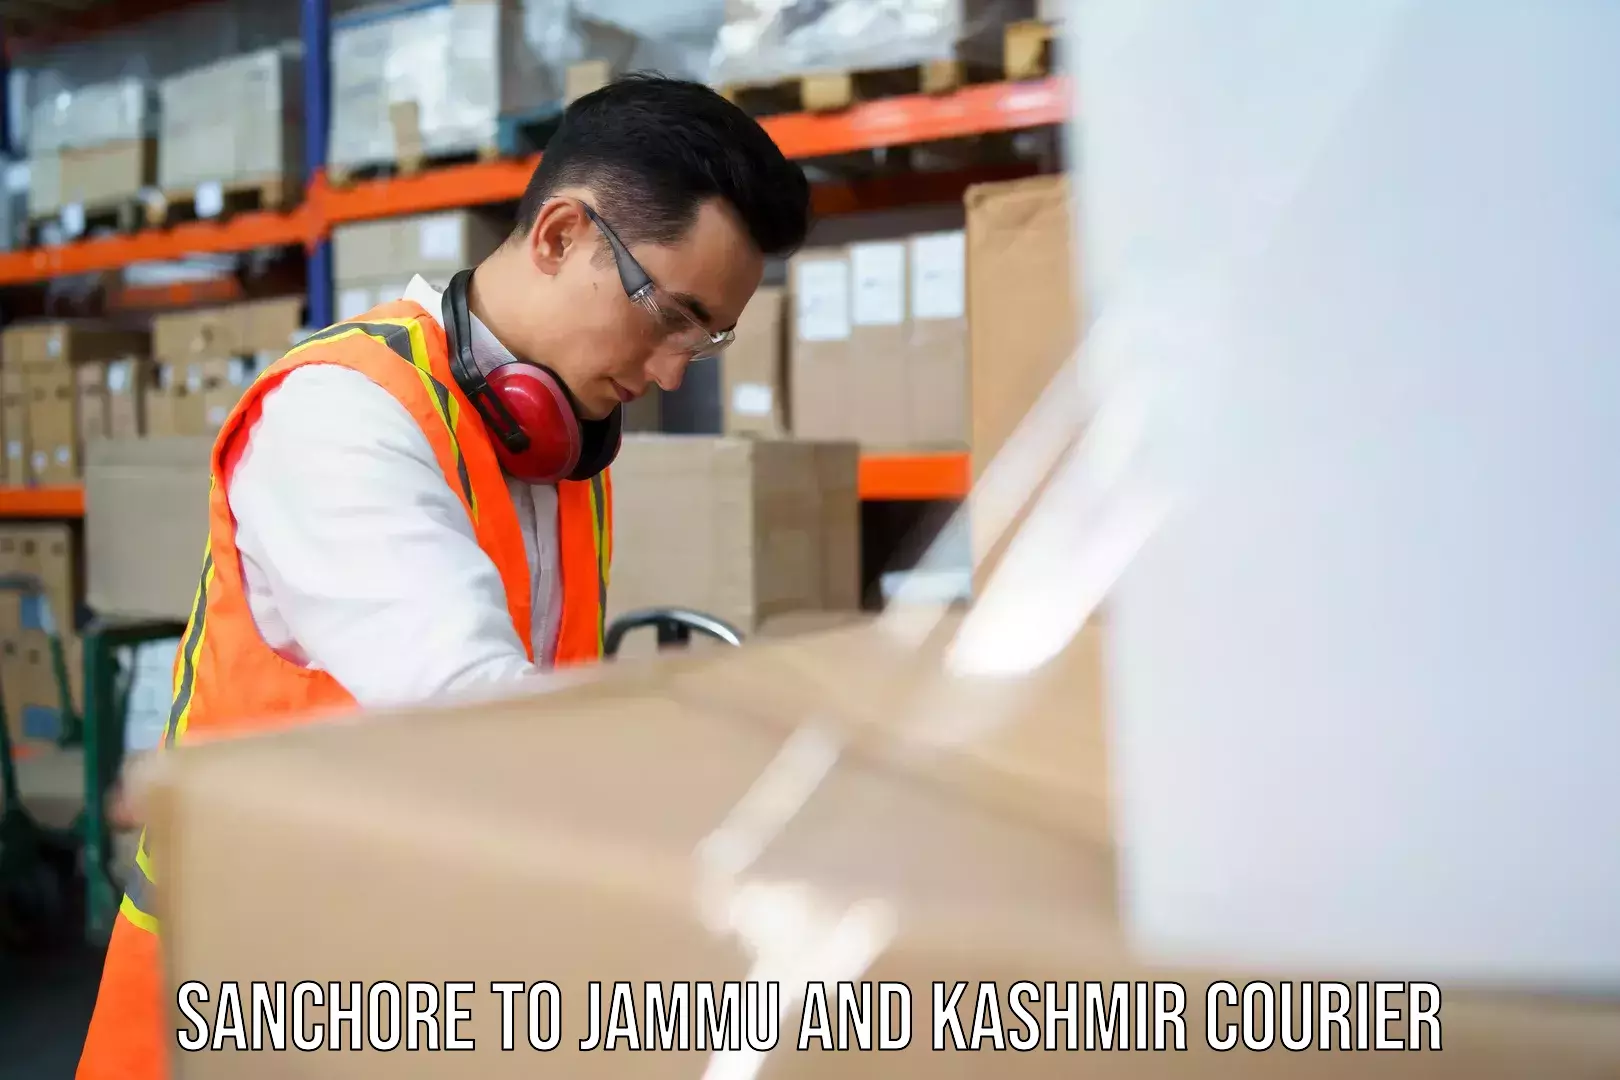 Customizable delivery plans Sanchore to Jammu and Kashmir